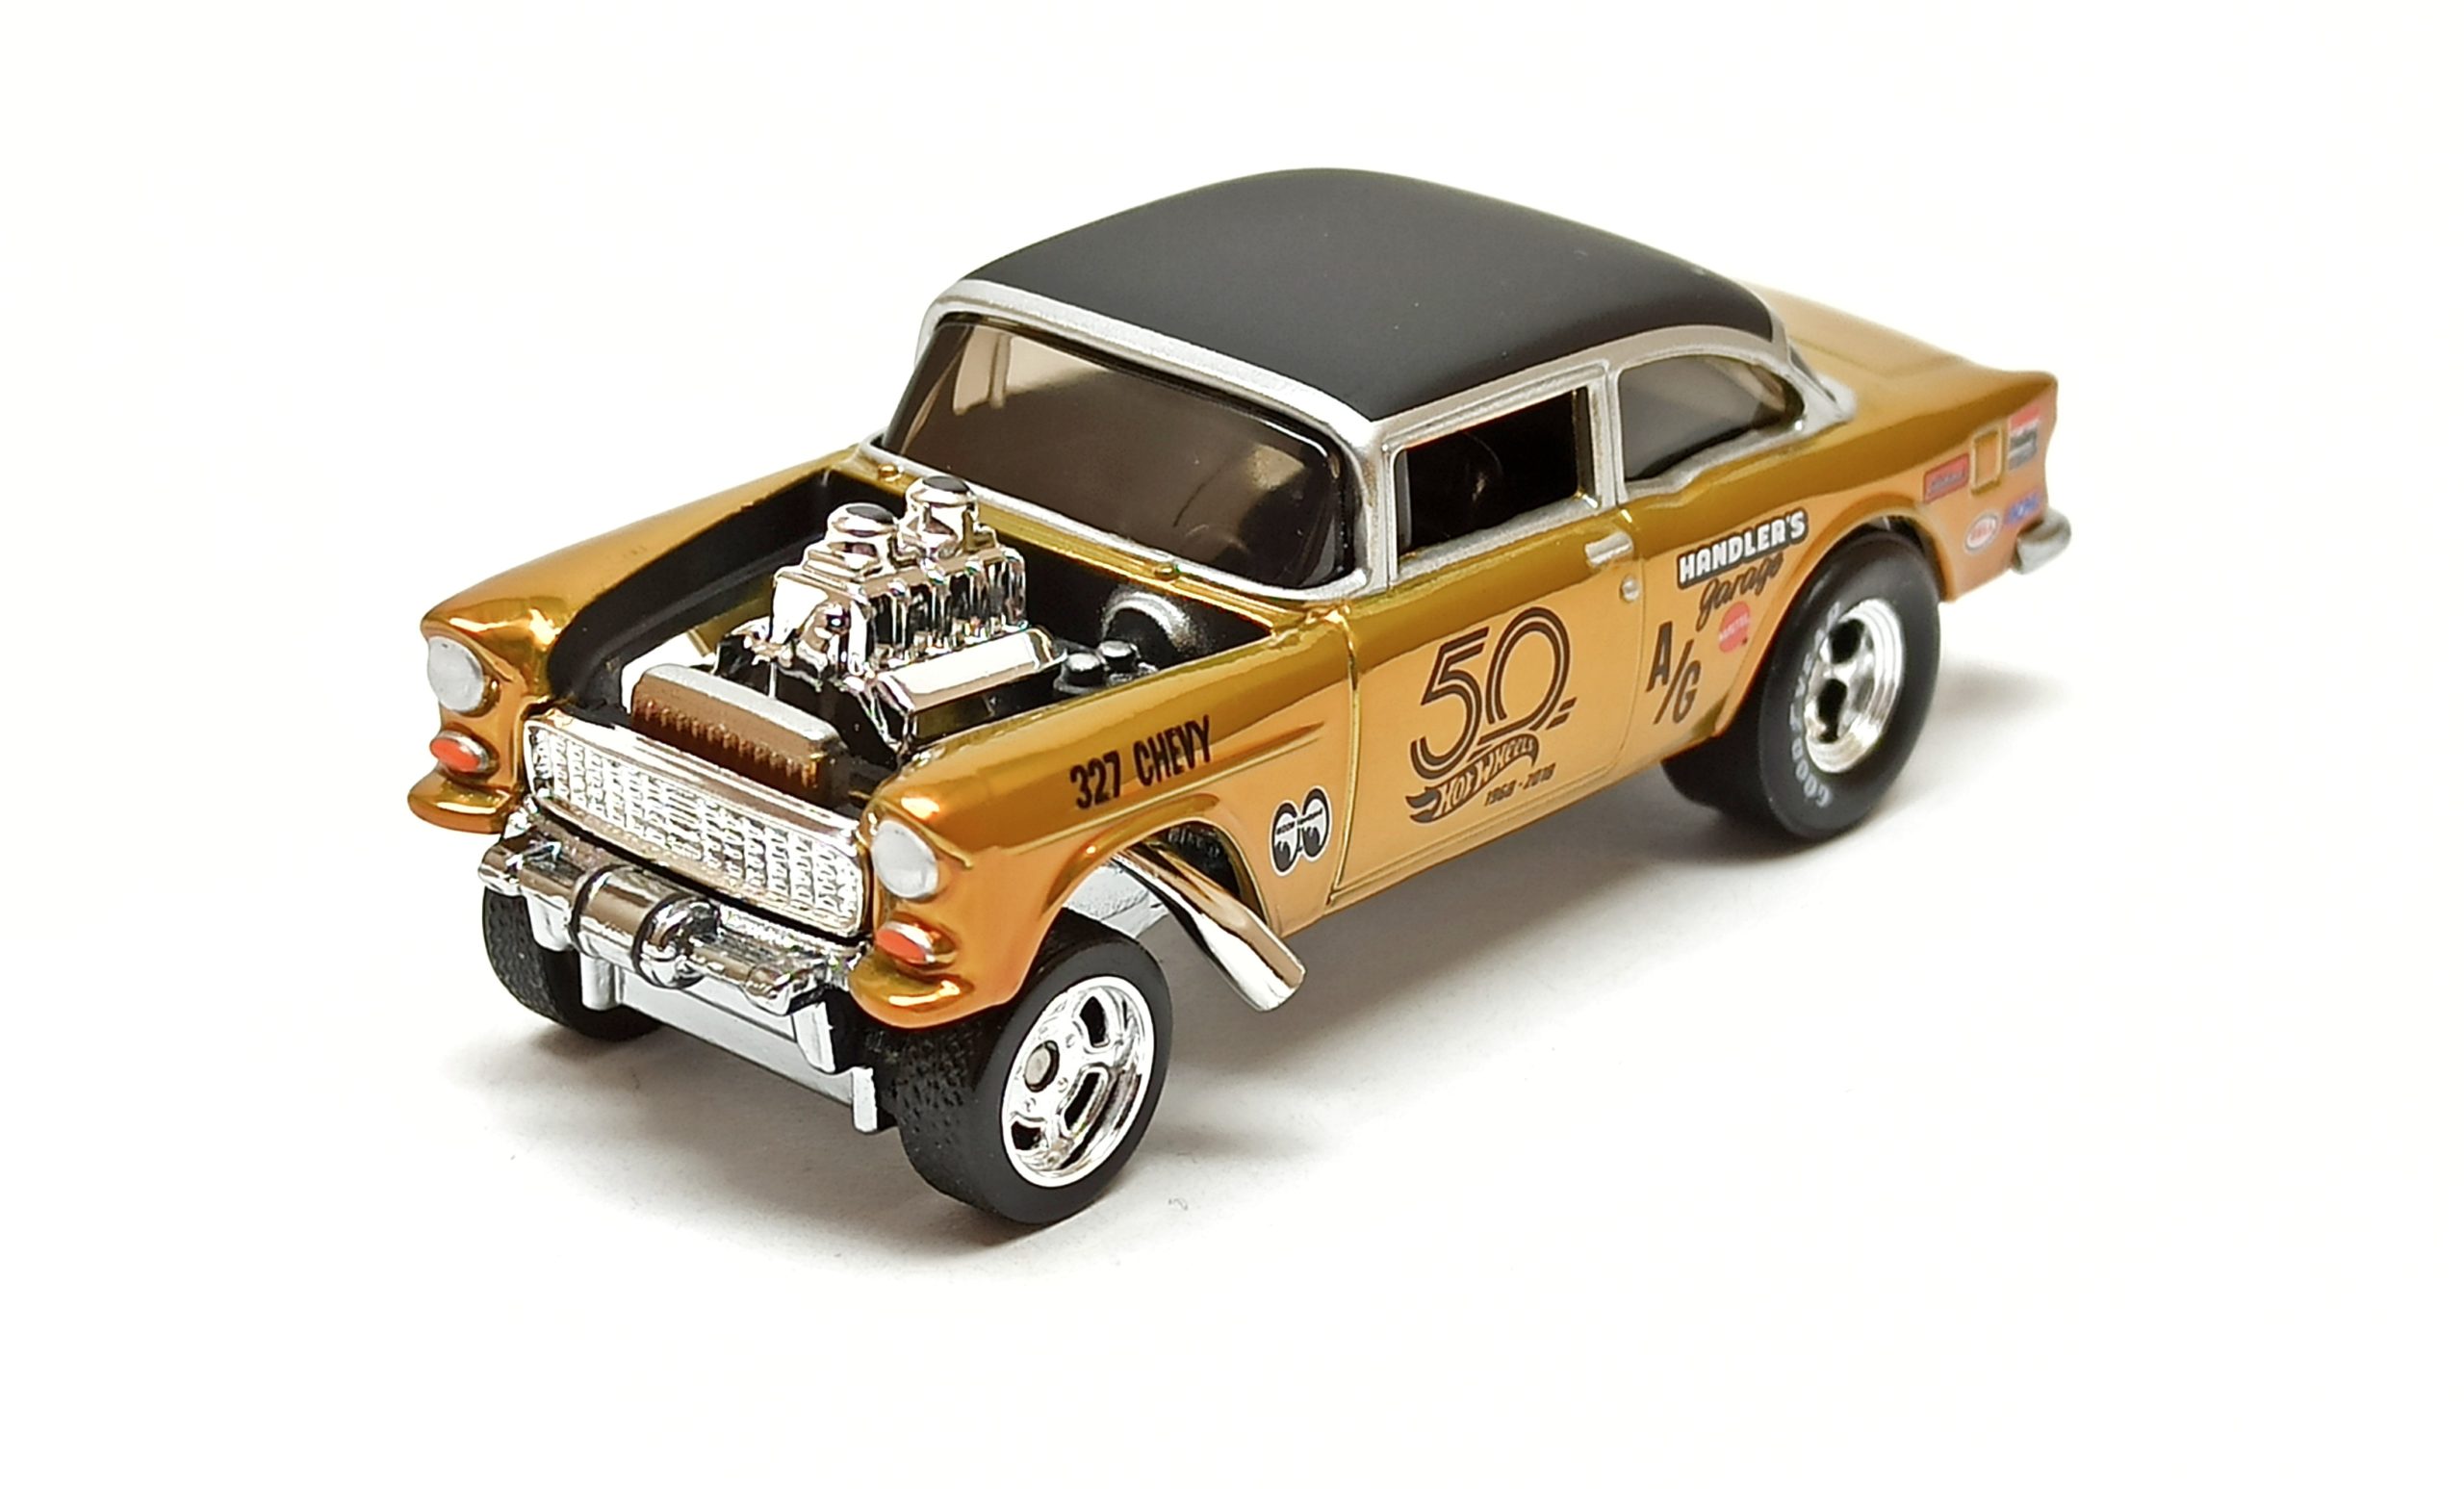 Hot Wheels '55 Chevy Bel Air Gasser 2018 18th Annual Collectors Nationals FPN21 gold 32nd Convention FPN25 black